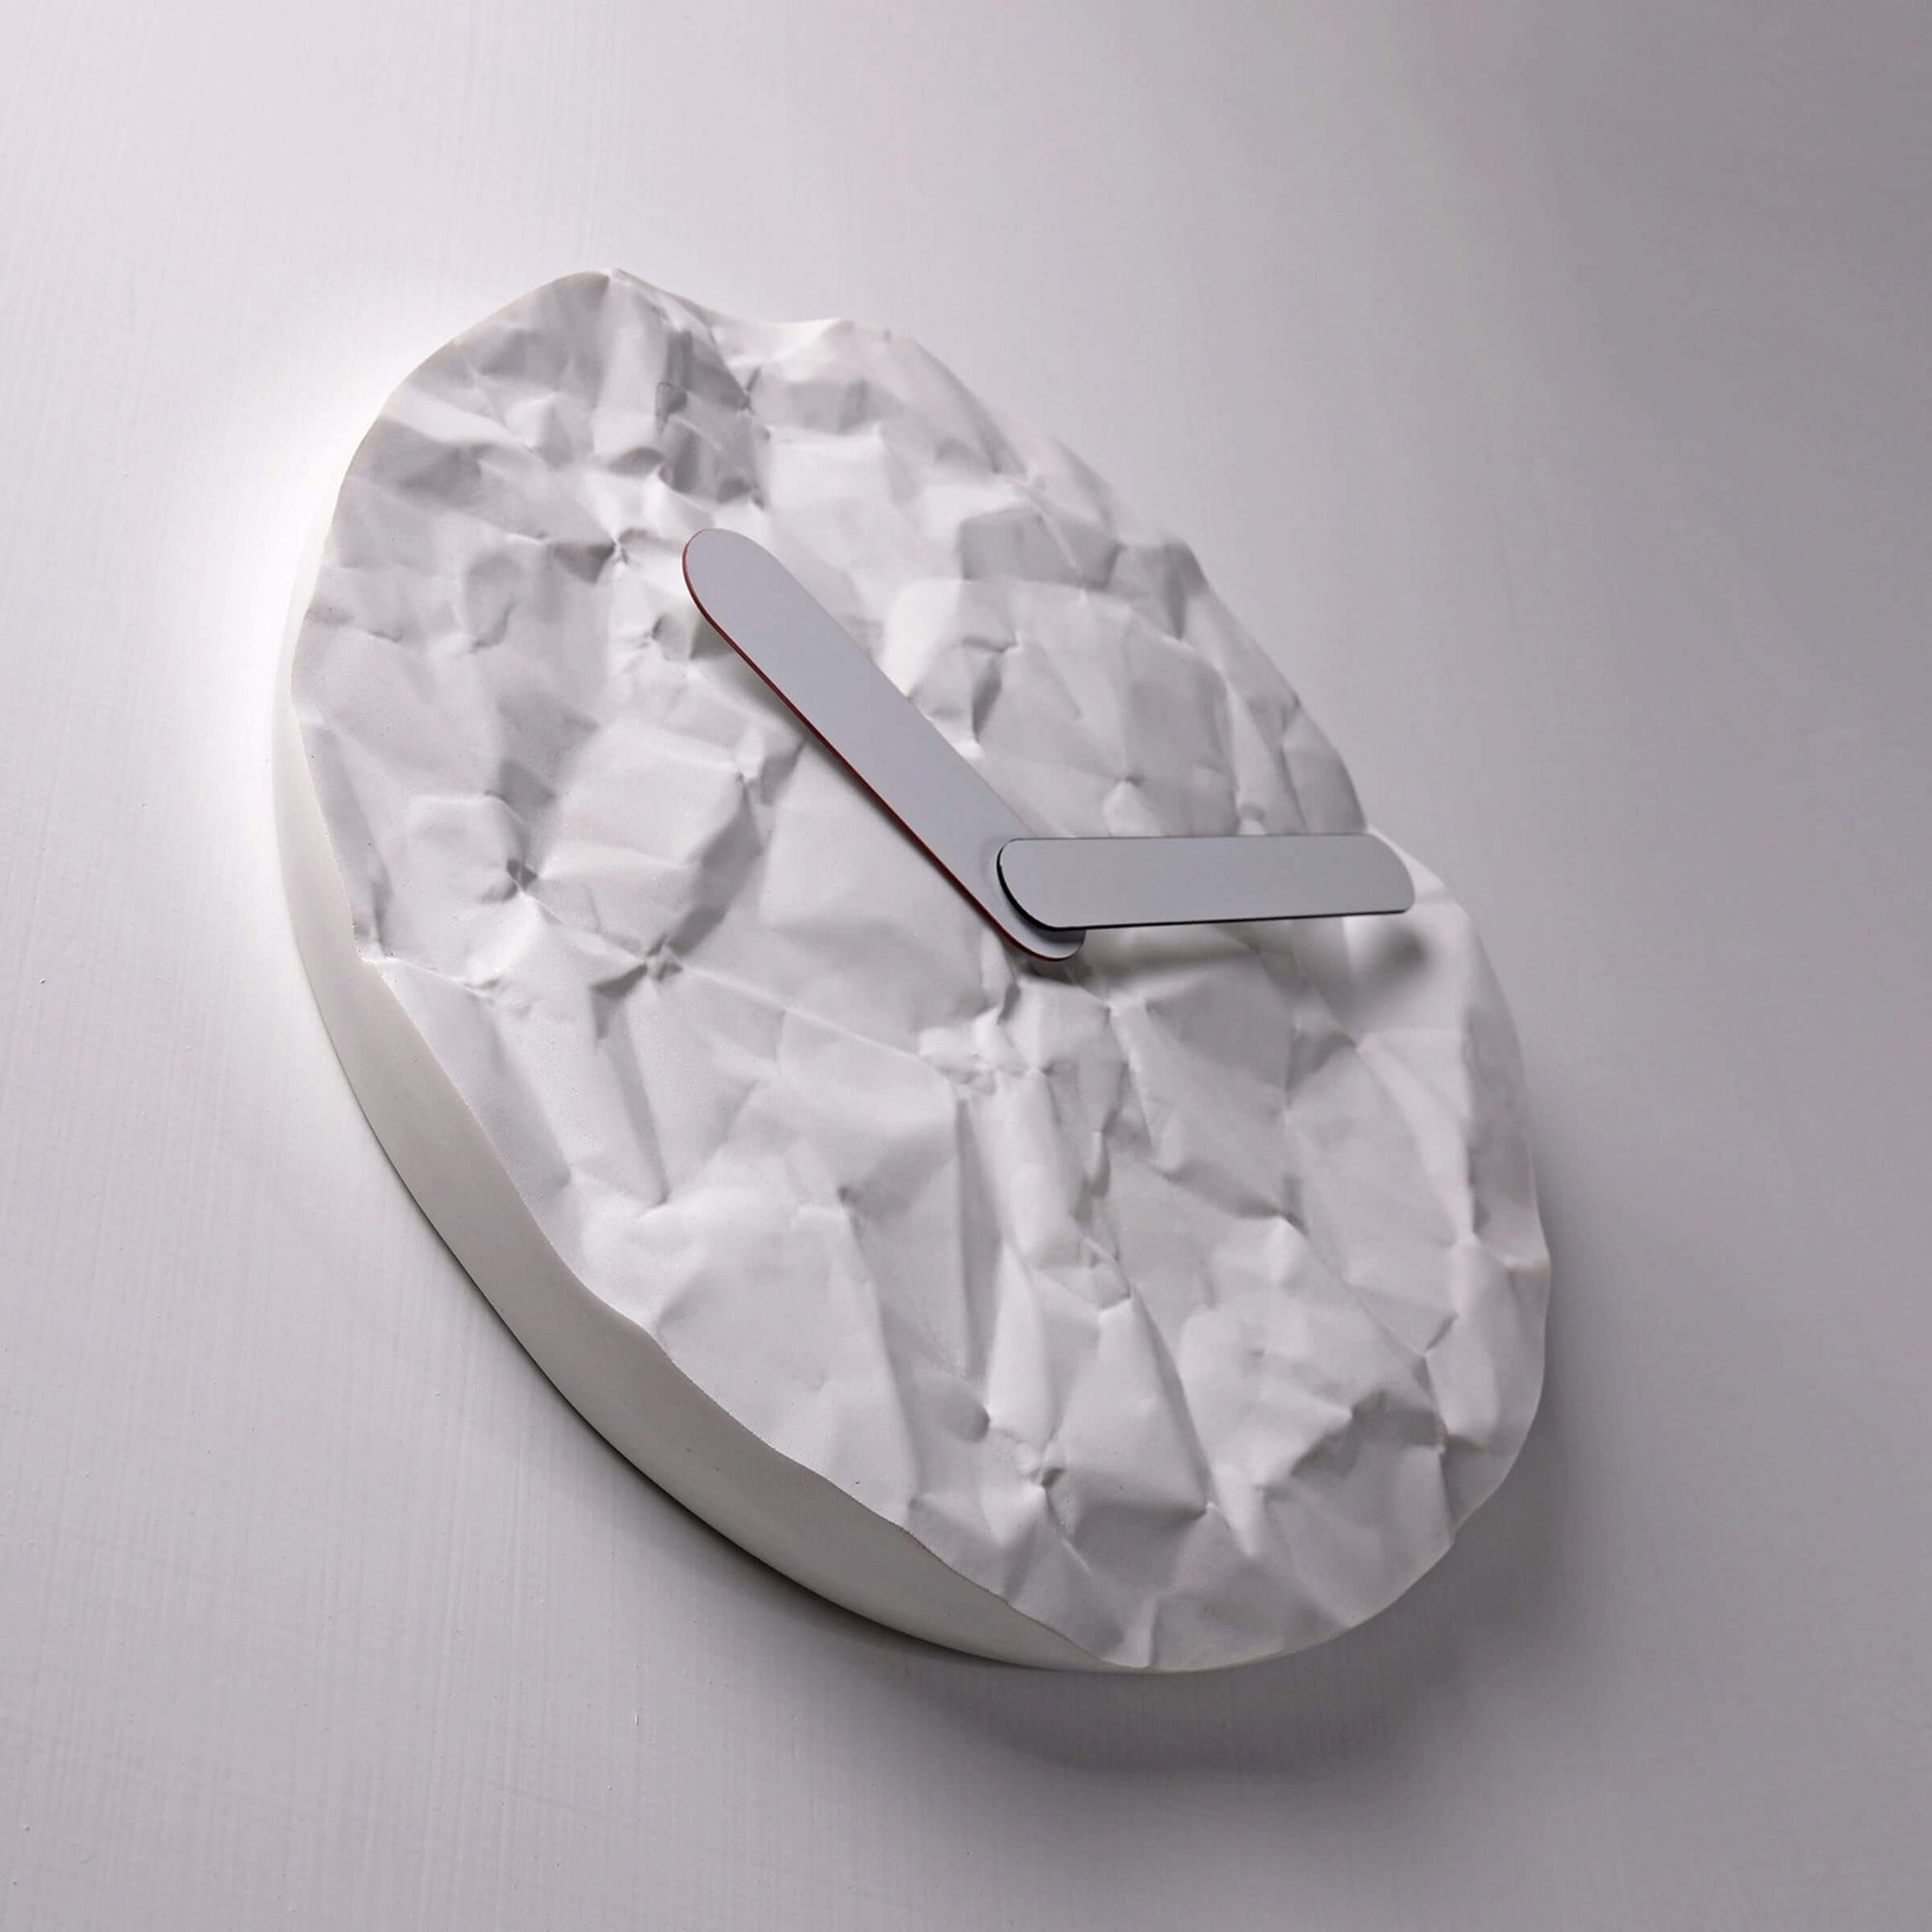 Modern wall clock - like just before or later, like a crumple paper